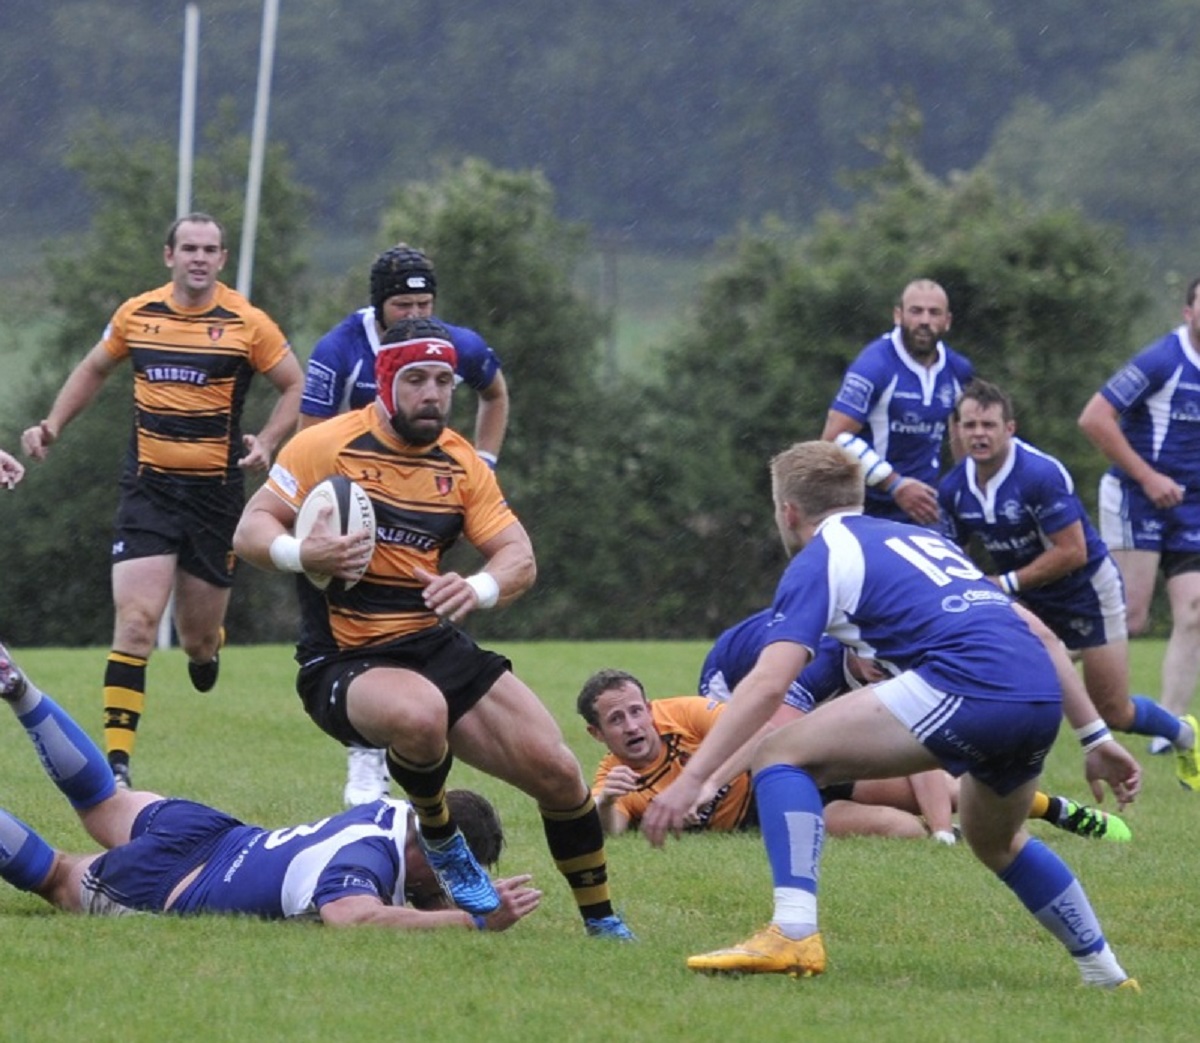 RUGBY: Thornbury to look to youth in clash at Kingsbridge - Gazette Series